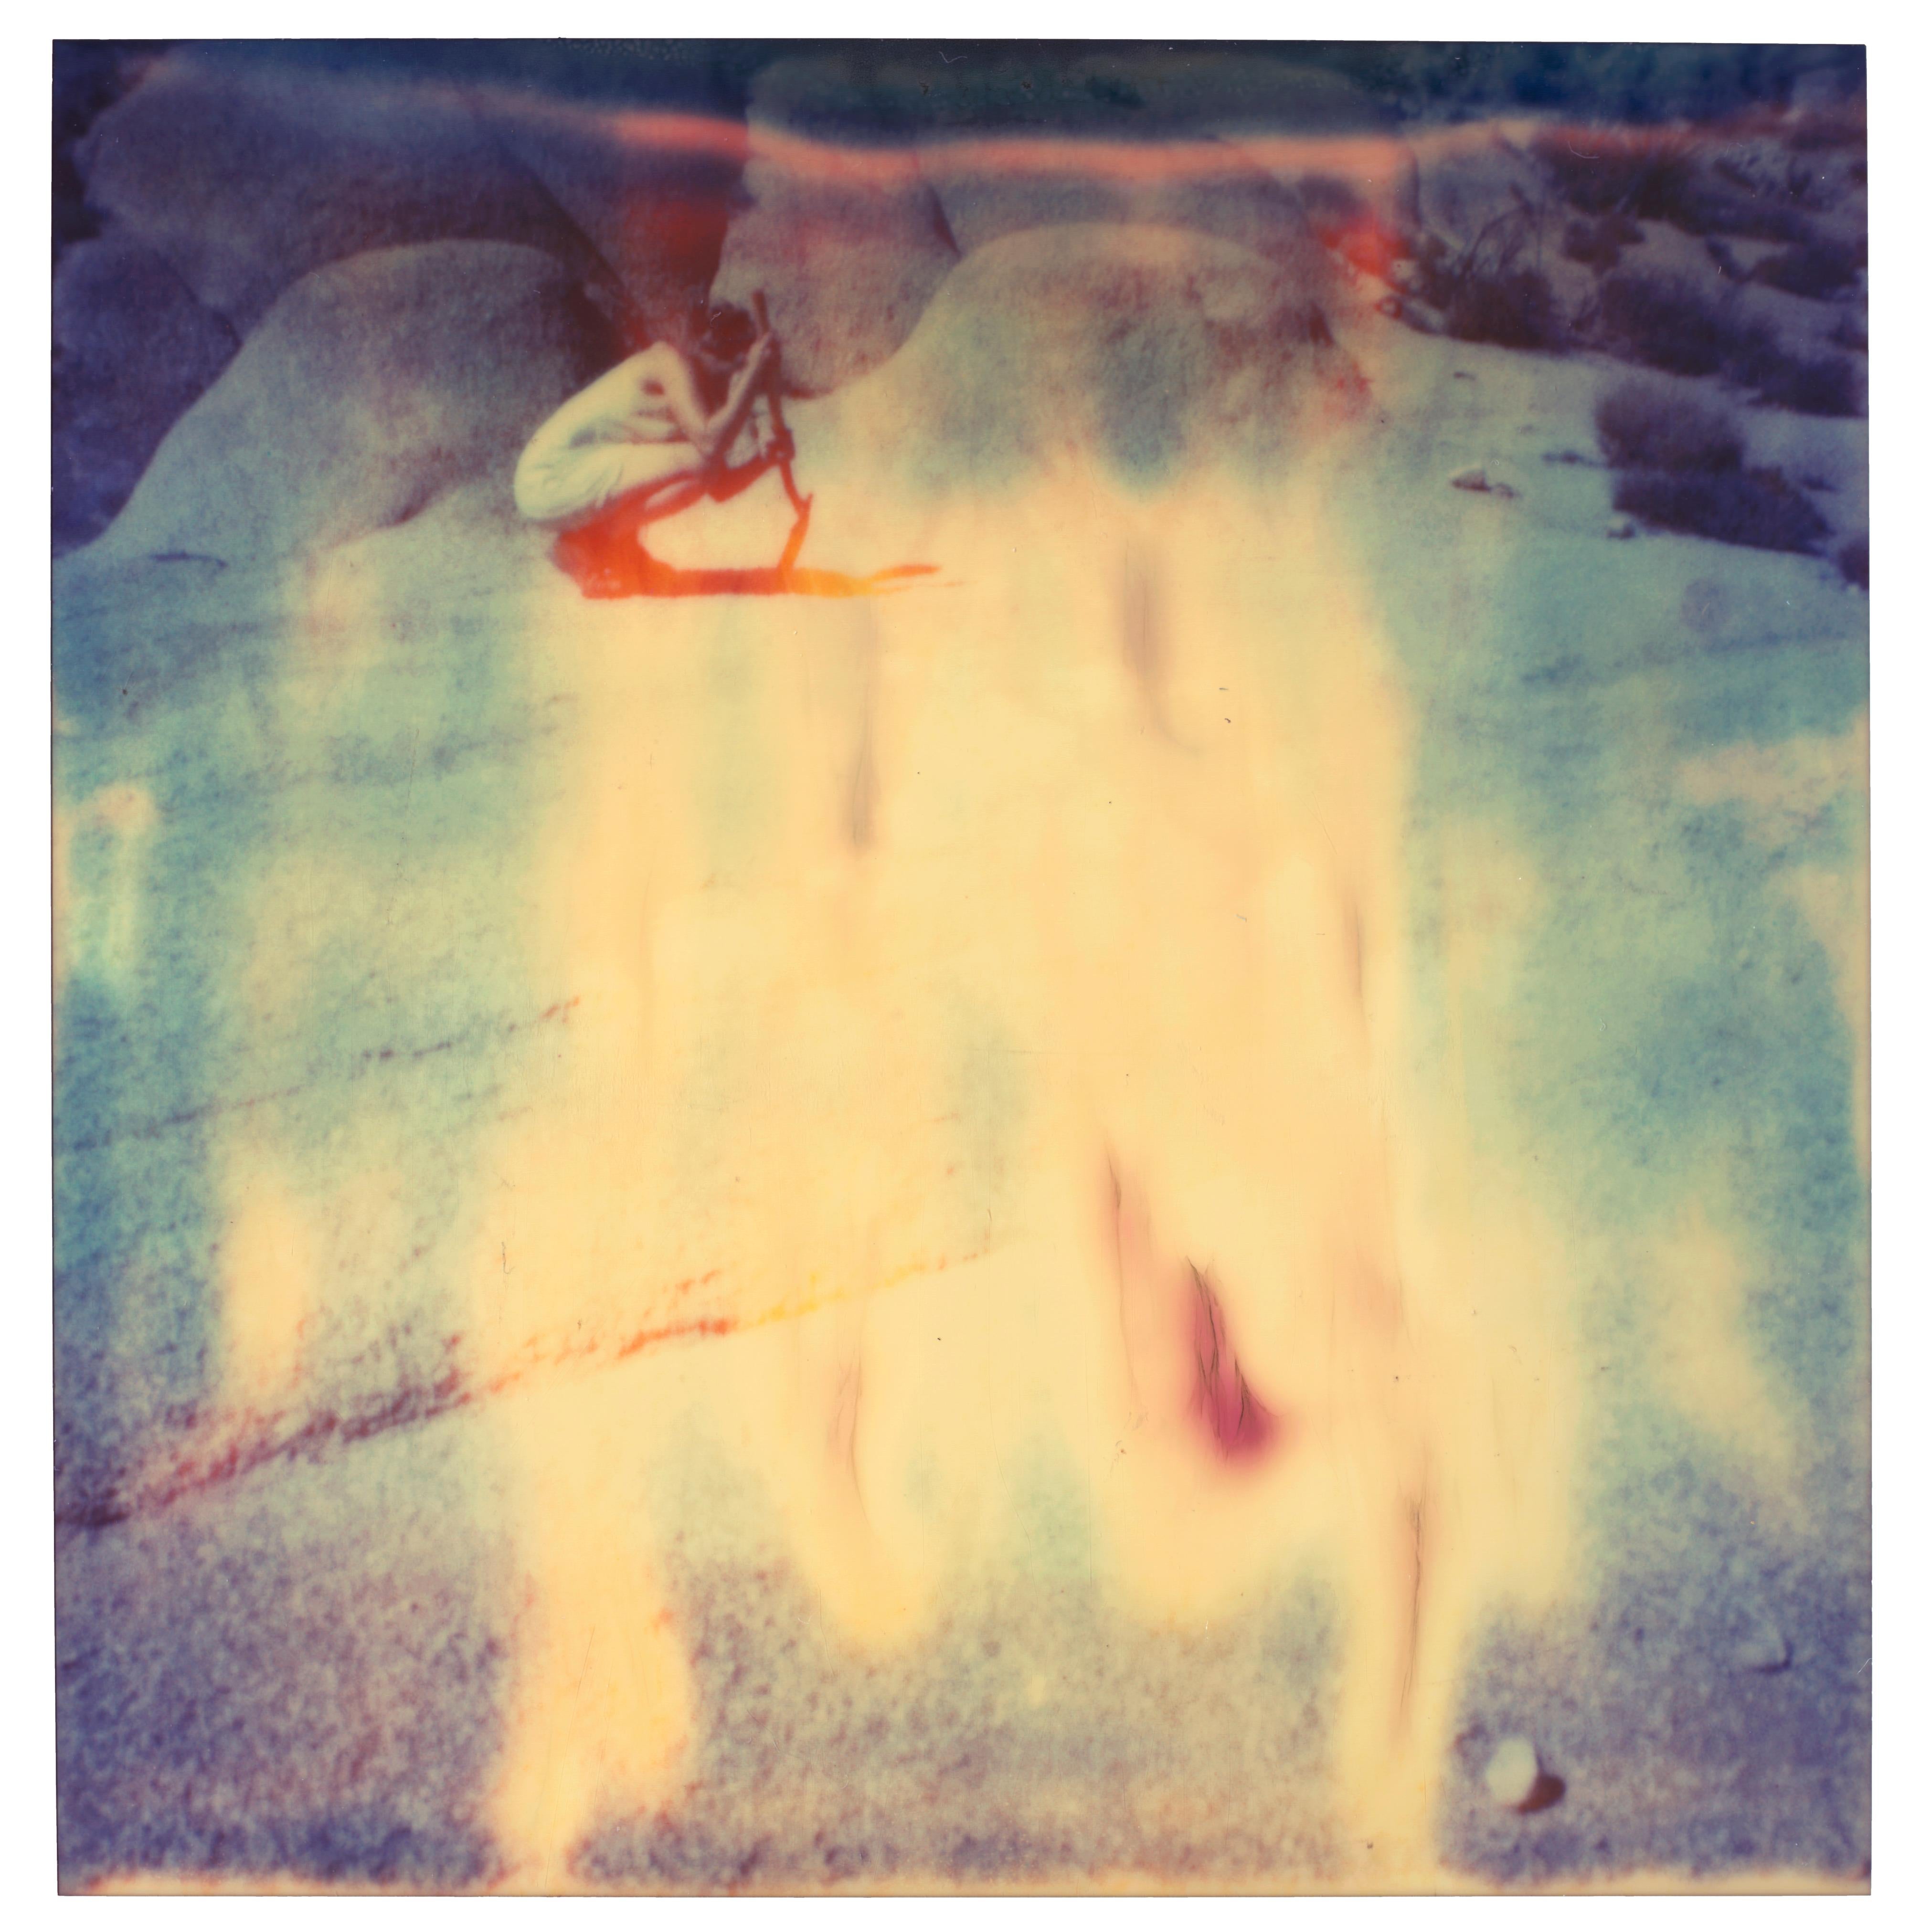 Buried - 8 pieces - Contemporary, Figurative, expired, Polaroid, analog For Sale 3